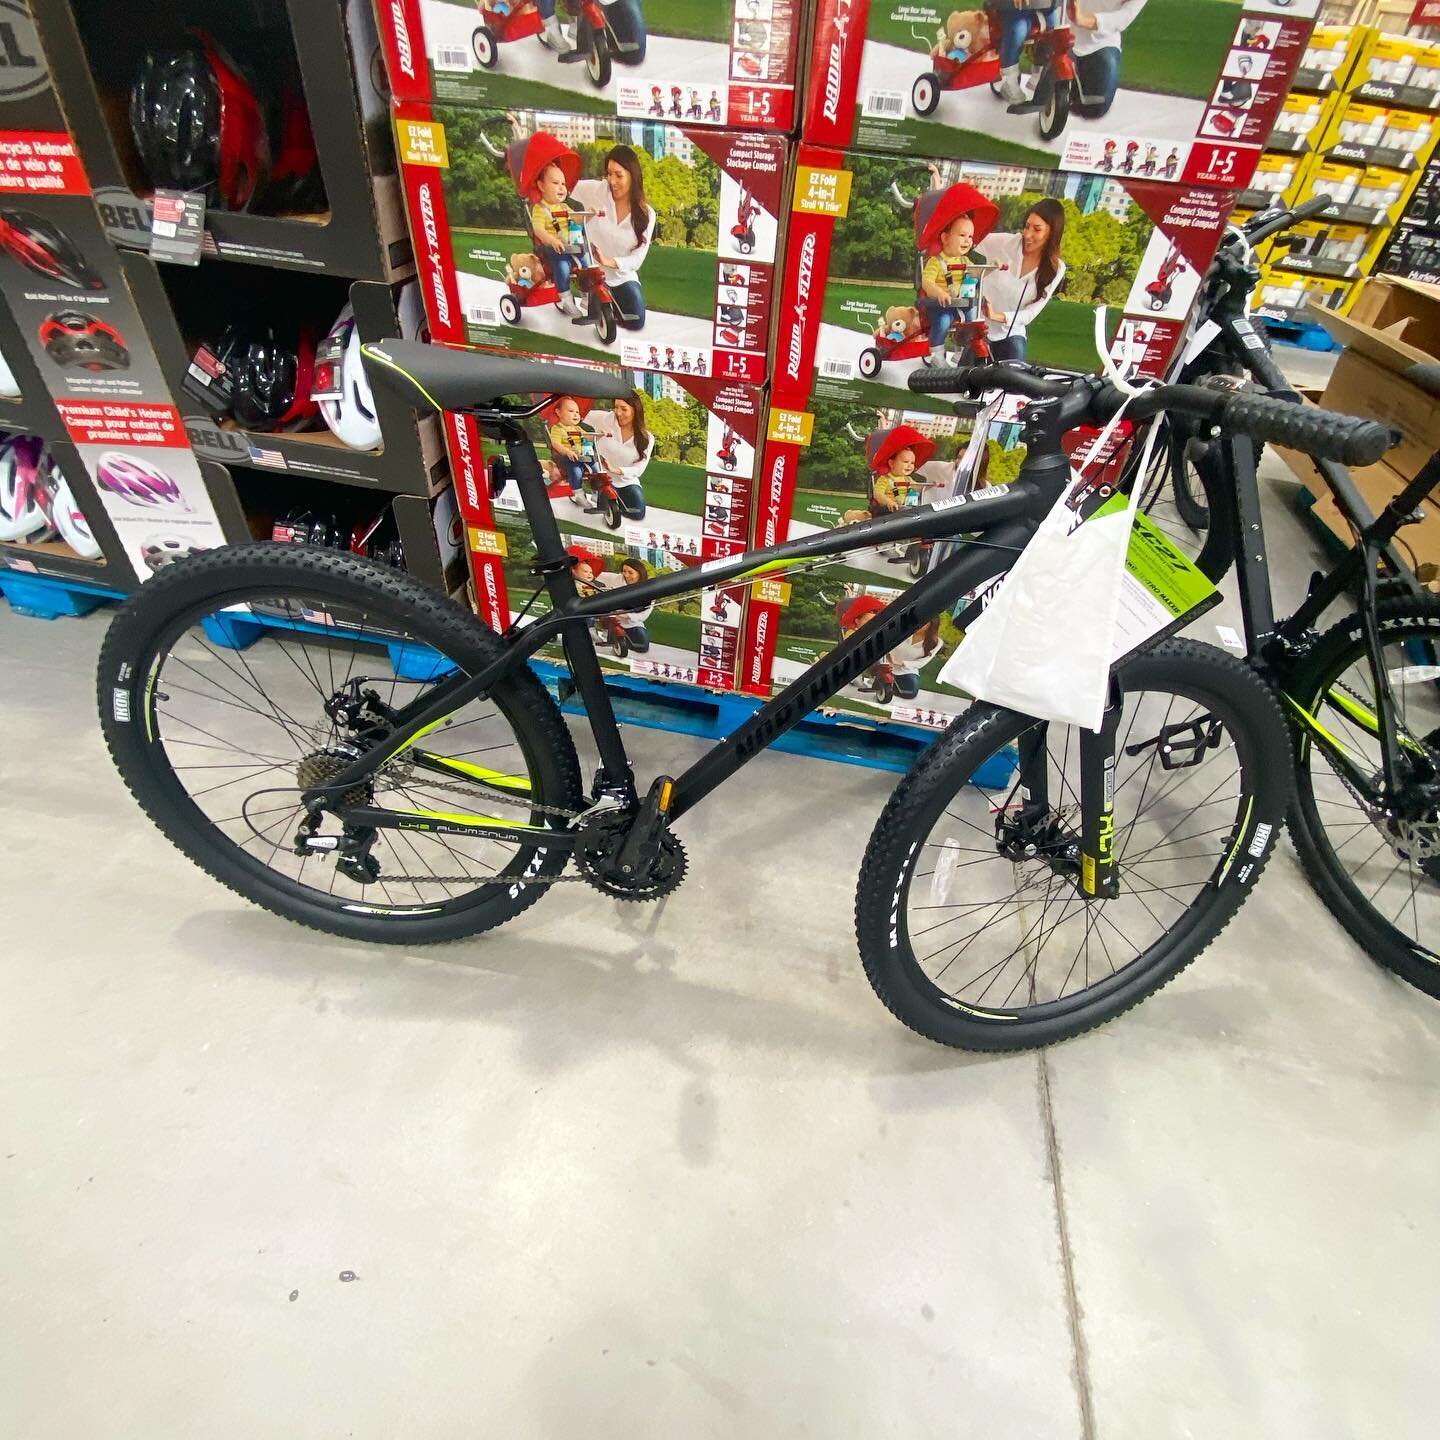 XC27 Adult Bikes! These have a 27.5inch frame made from aluminum and 21 speeds. Other features include SR Suntour Suspension, VELO saddle, TEKTRO disc brakes, and Shimano Altus shifters. Price $399.99 📍Newmarket 
#costco #costcofindscanada #costcofi